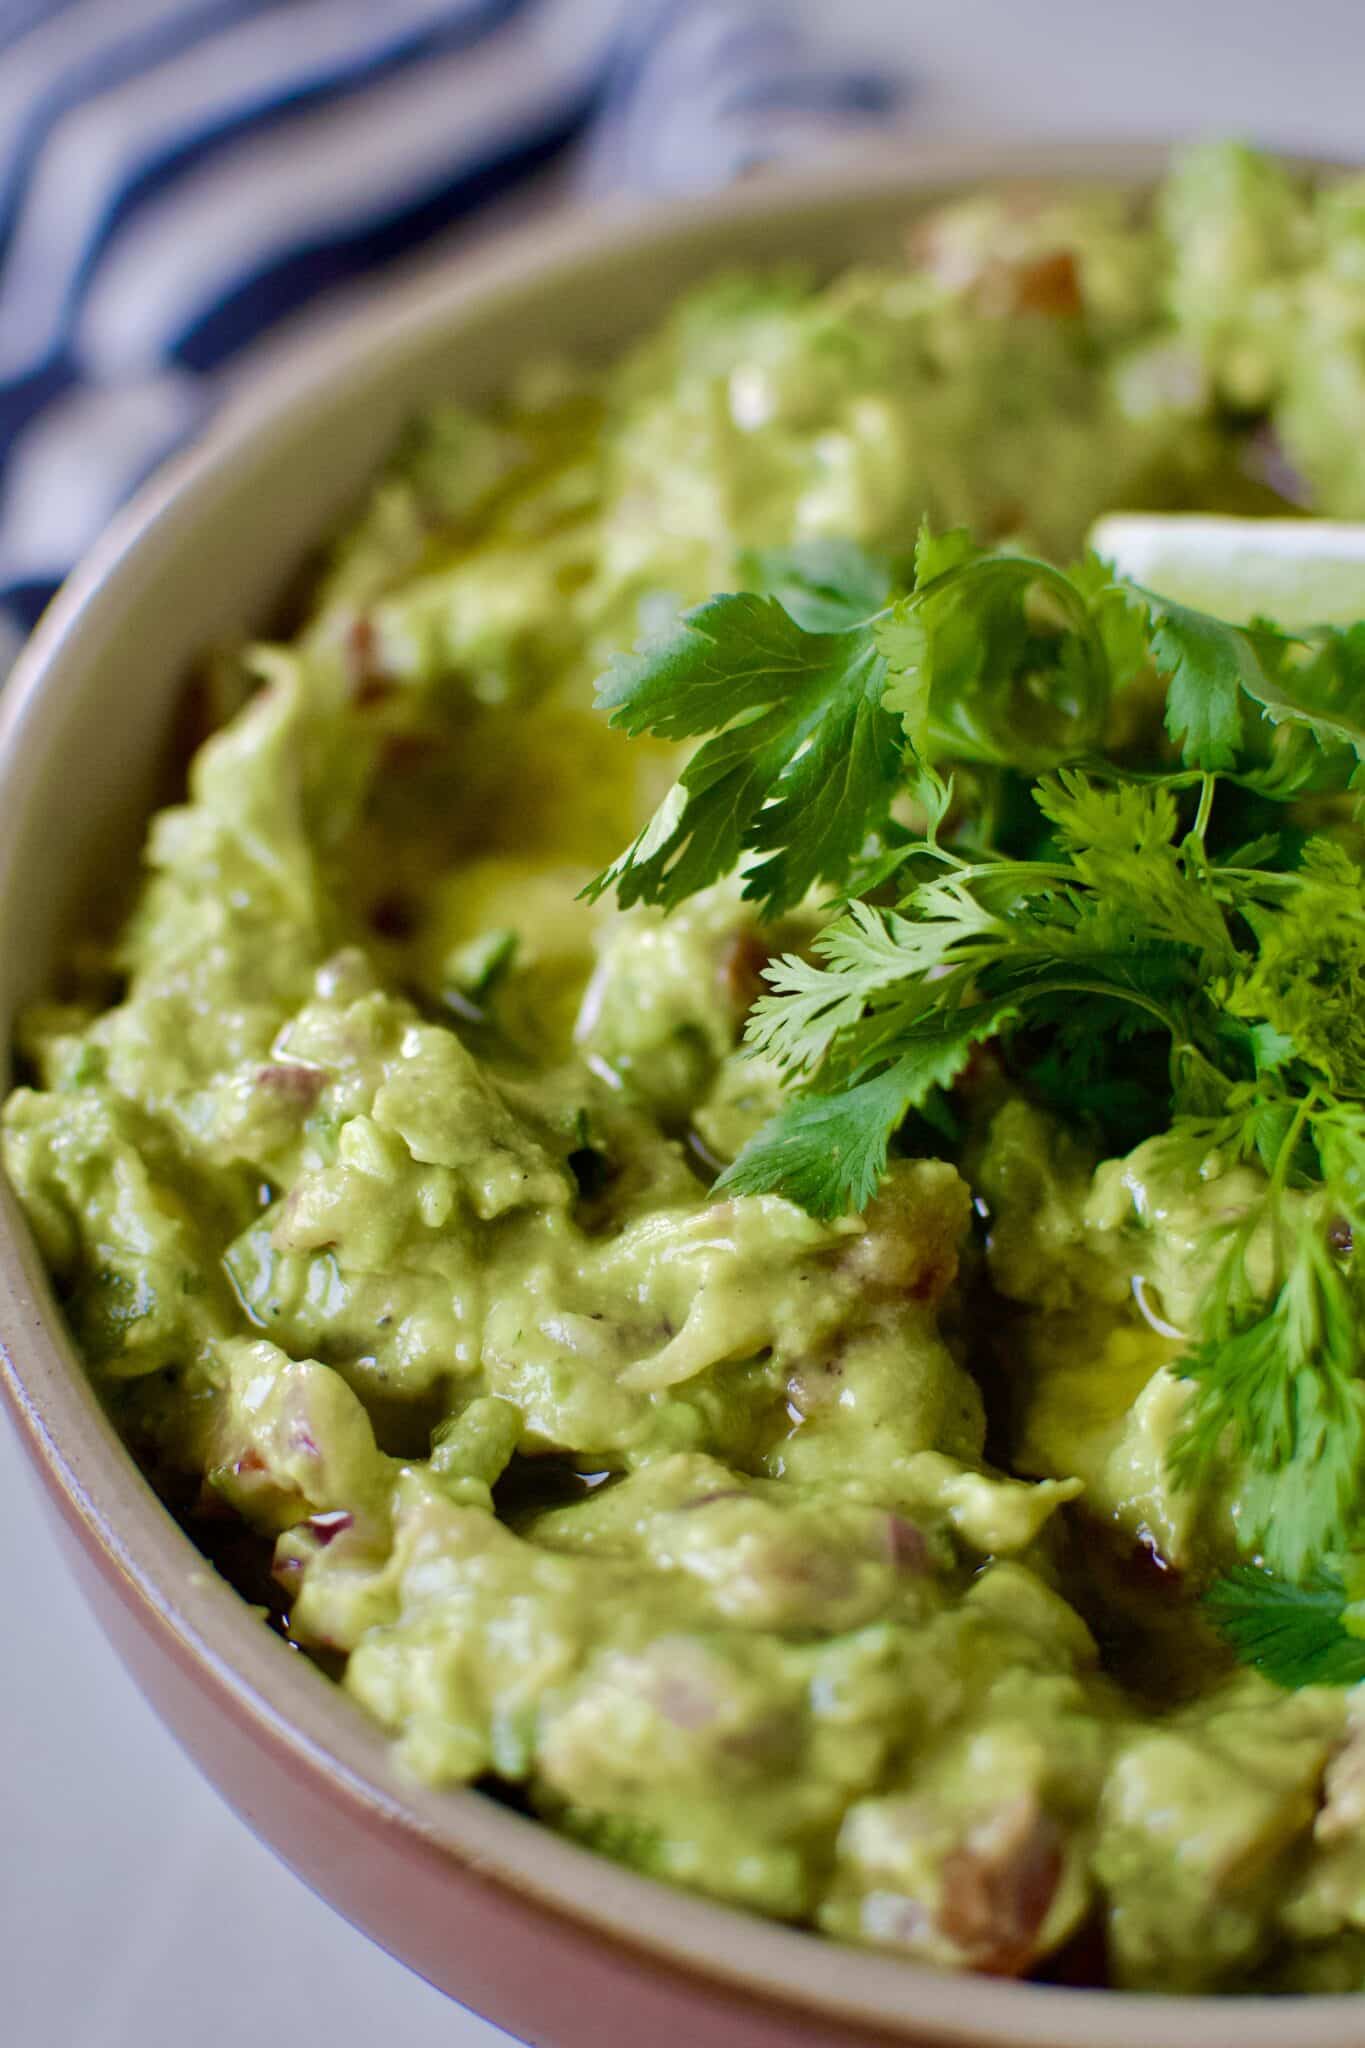 Mexican Guacamole Recipe in a bowl topped with baby cilantro sprigs and olive oil.